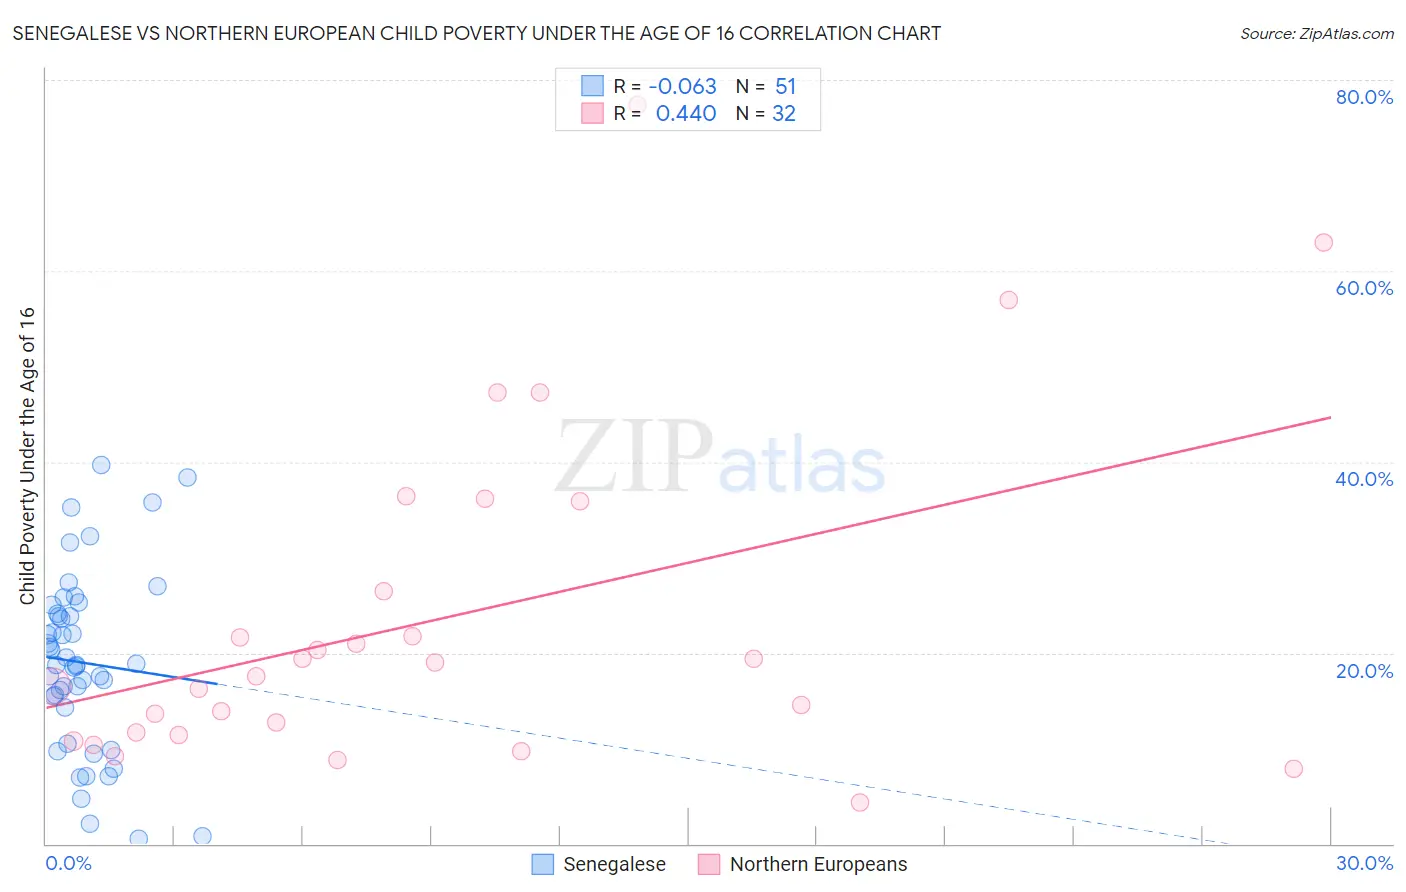 Senegalese vs Northern European Child Poverty Under the Age of 16